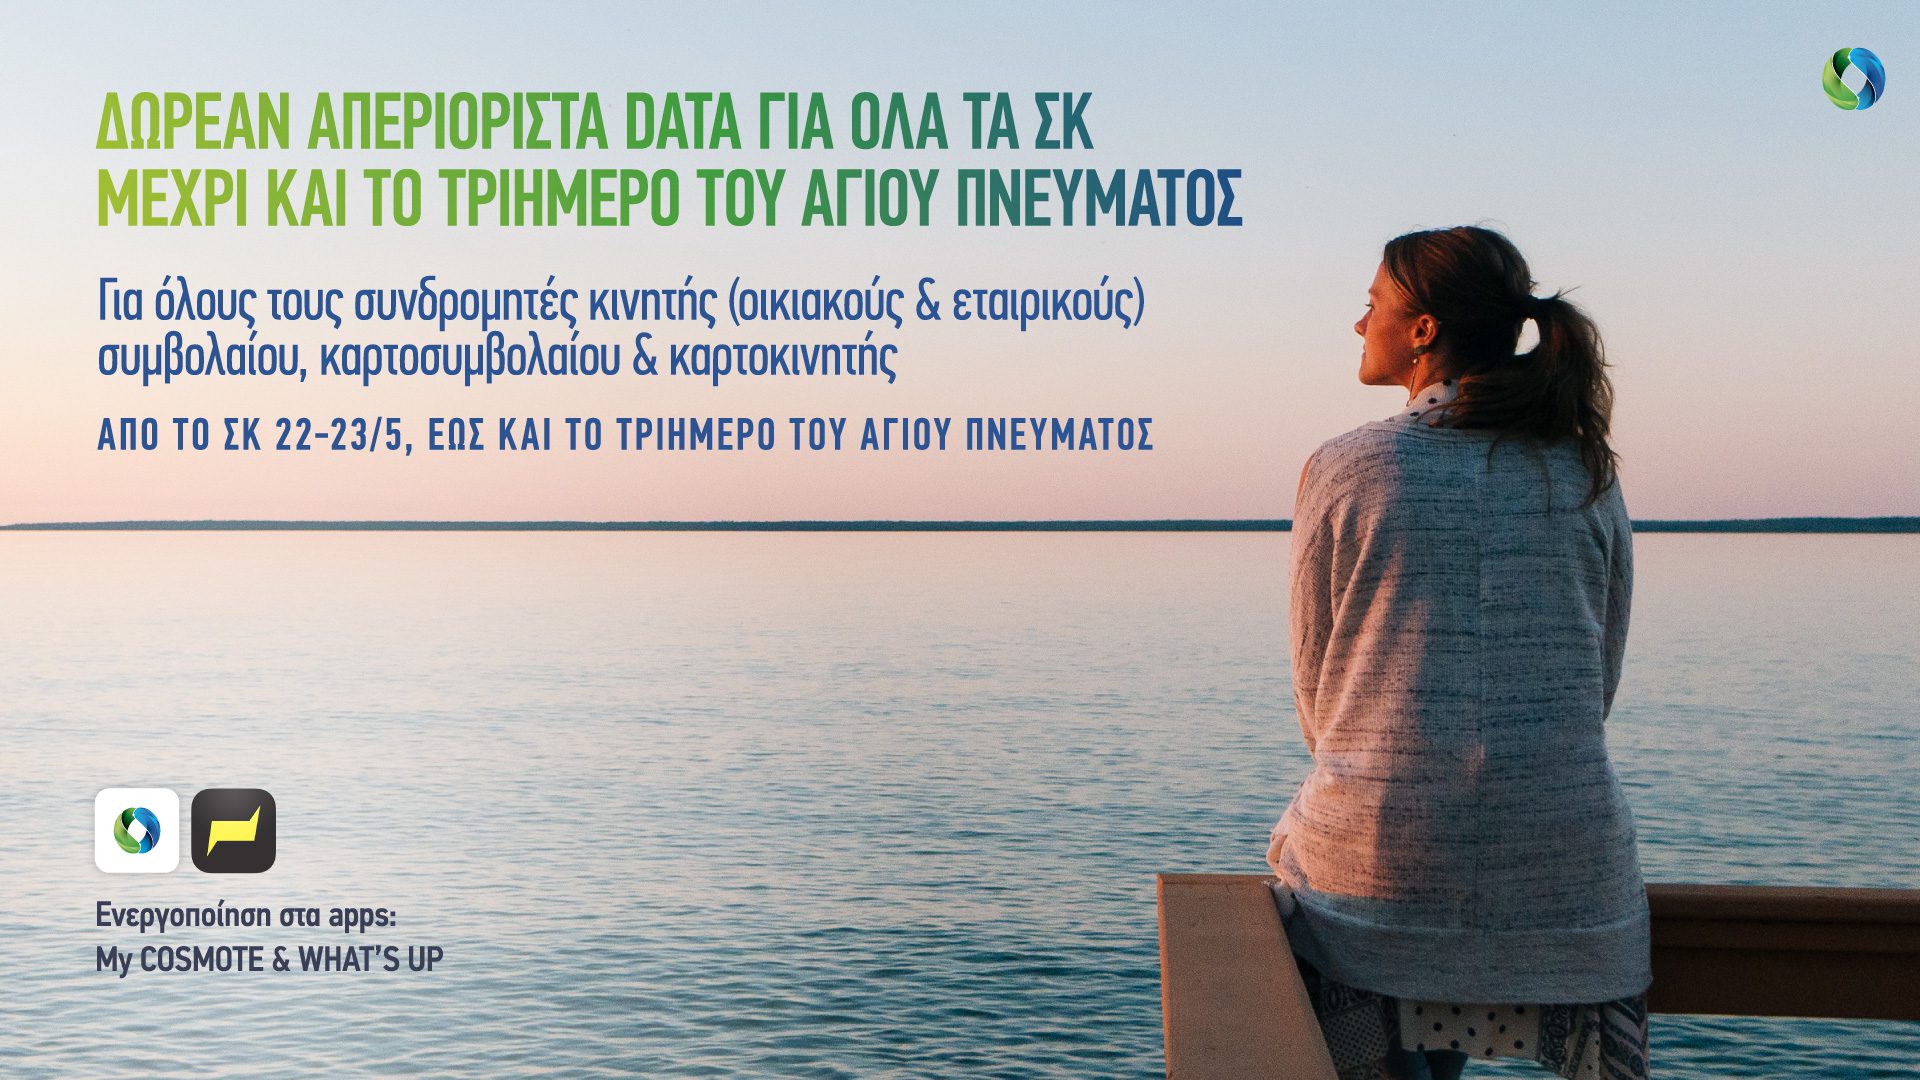 COSMOTE Unlimited Data Offer